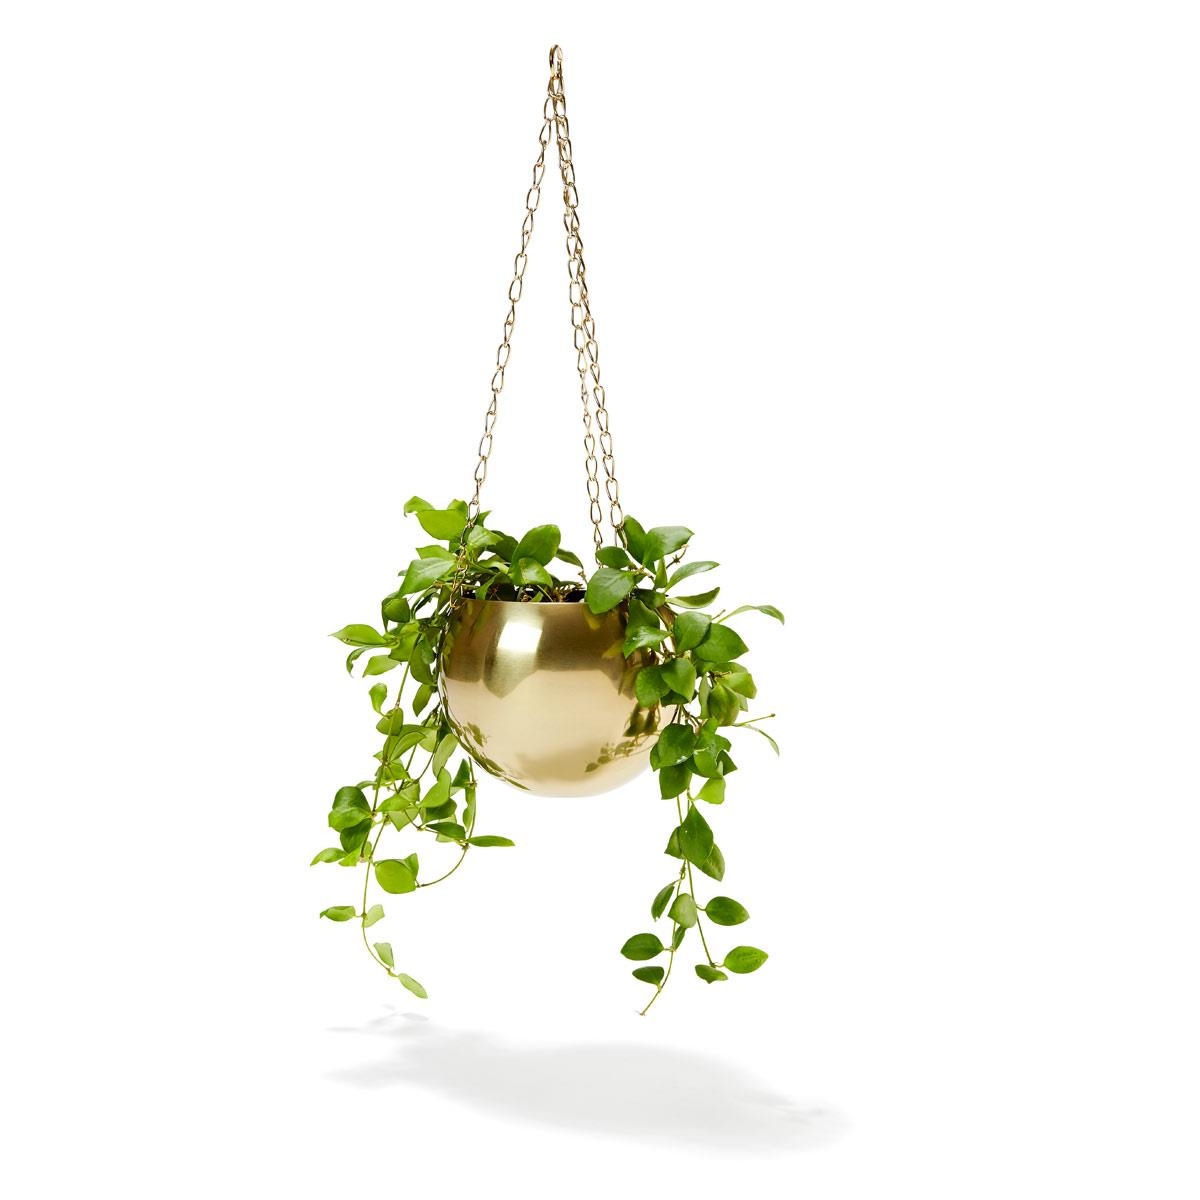 Brass Plated Hanging Planter